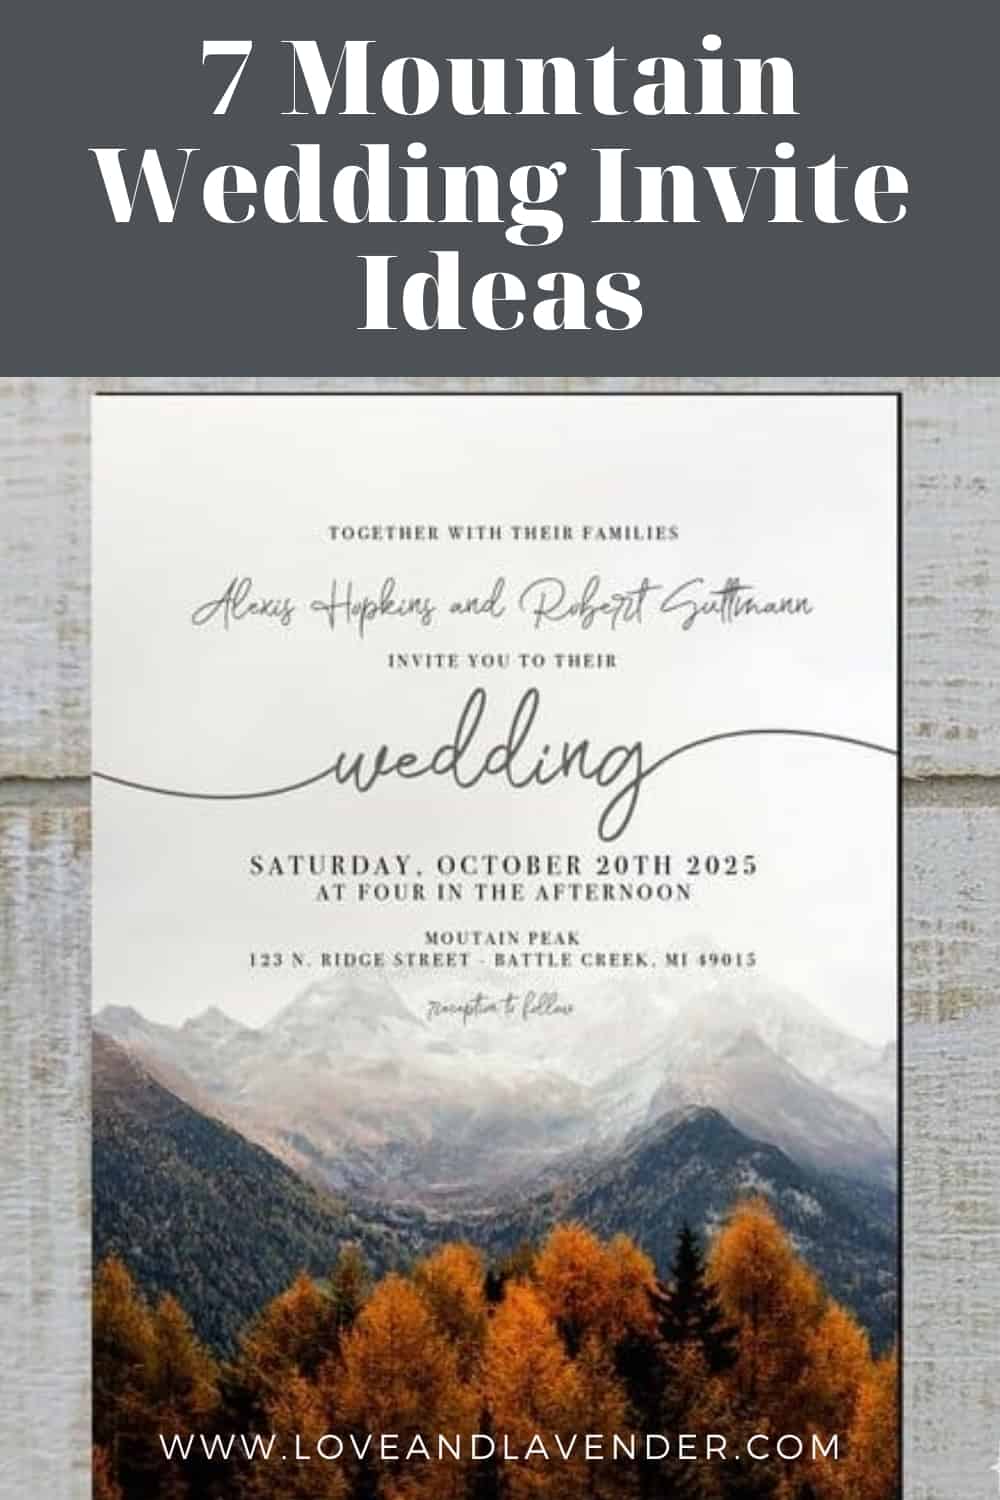 13 Mountain Wedding Invite Ideas & Themed Inspiration to Brave the Slopes of Marriage Together!